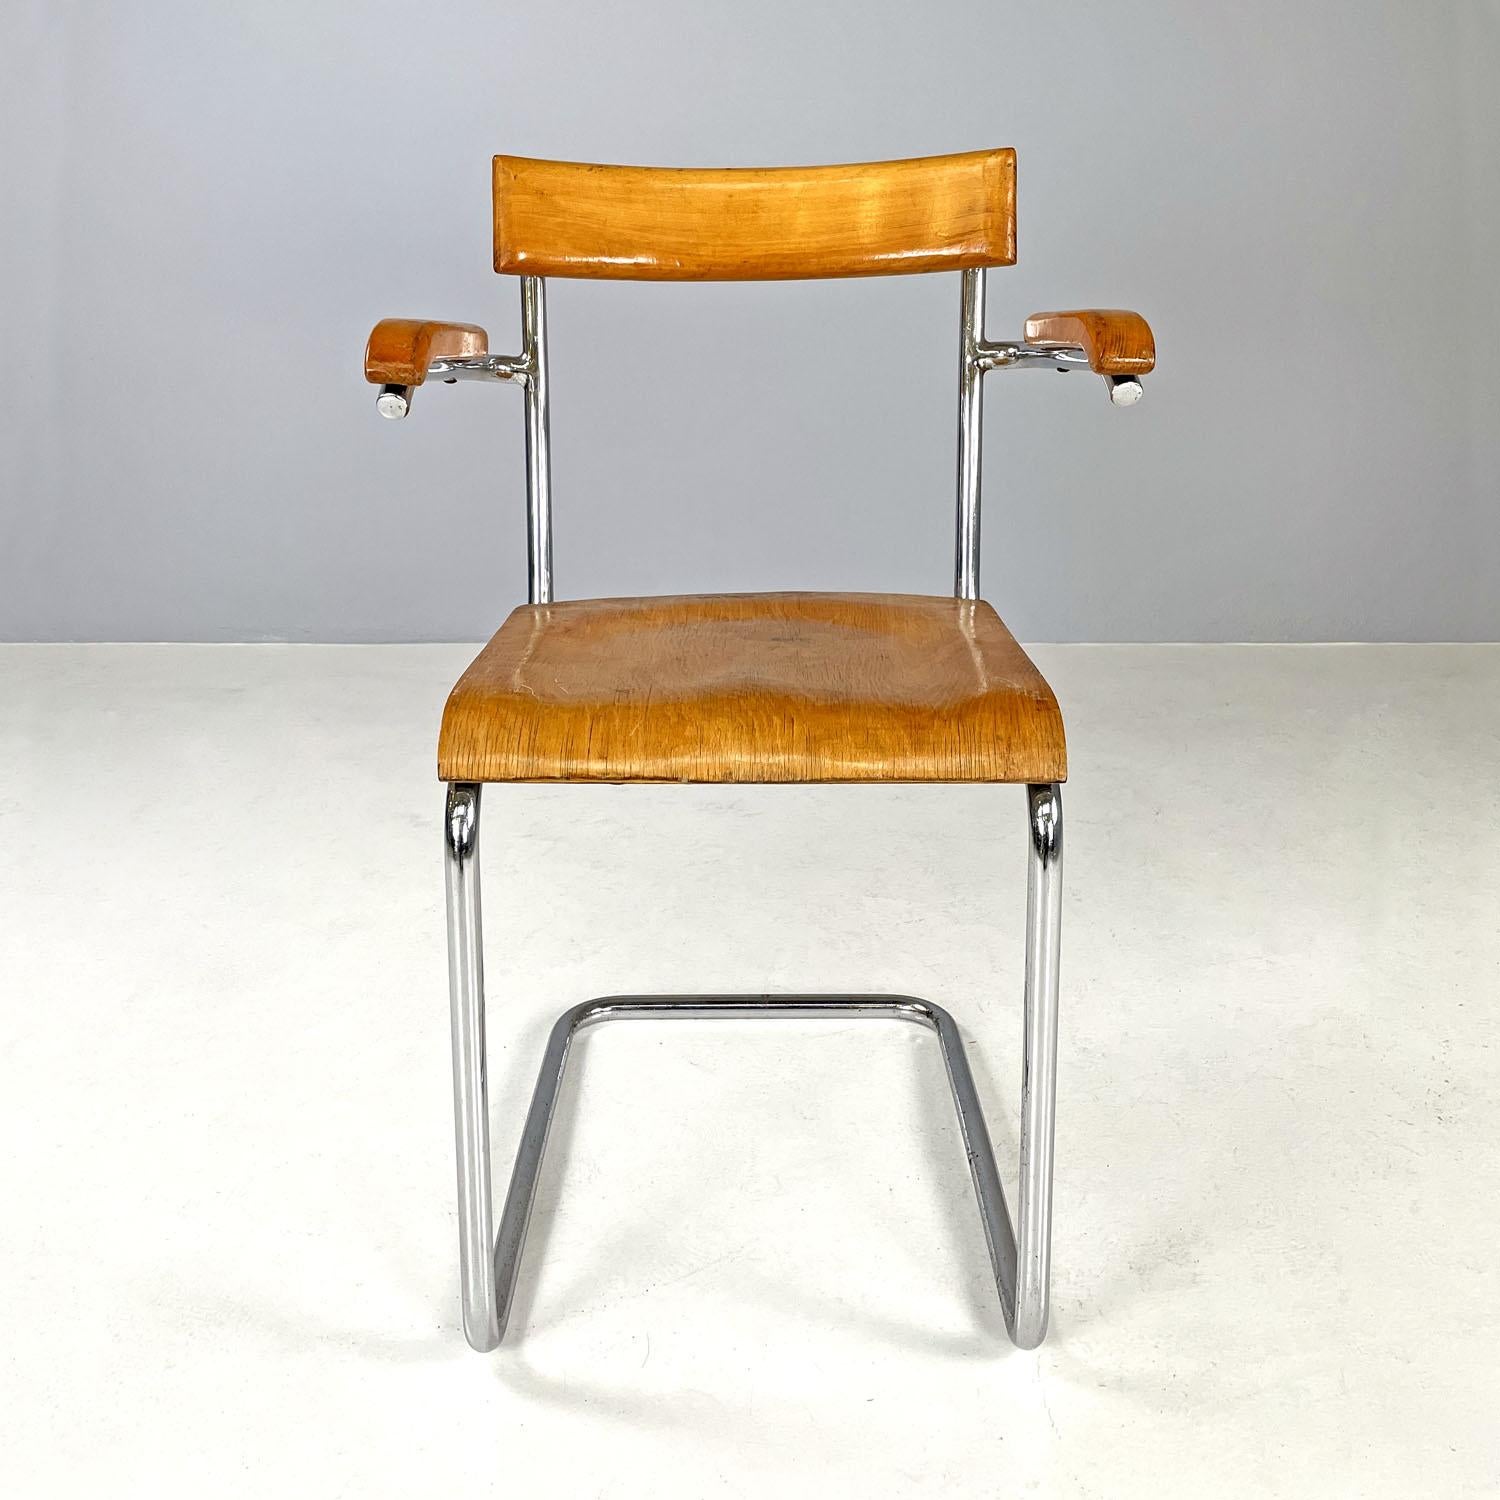 Italian Czech Art Deco wood and chromed steel chair with armrests by Ladislav Zak, 1930s For Sale